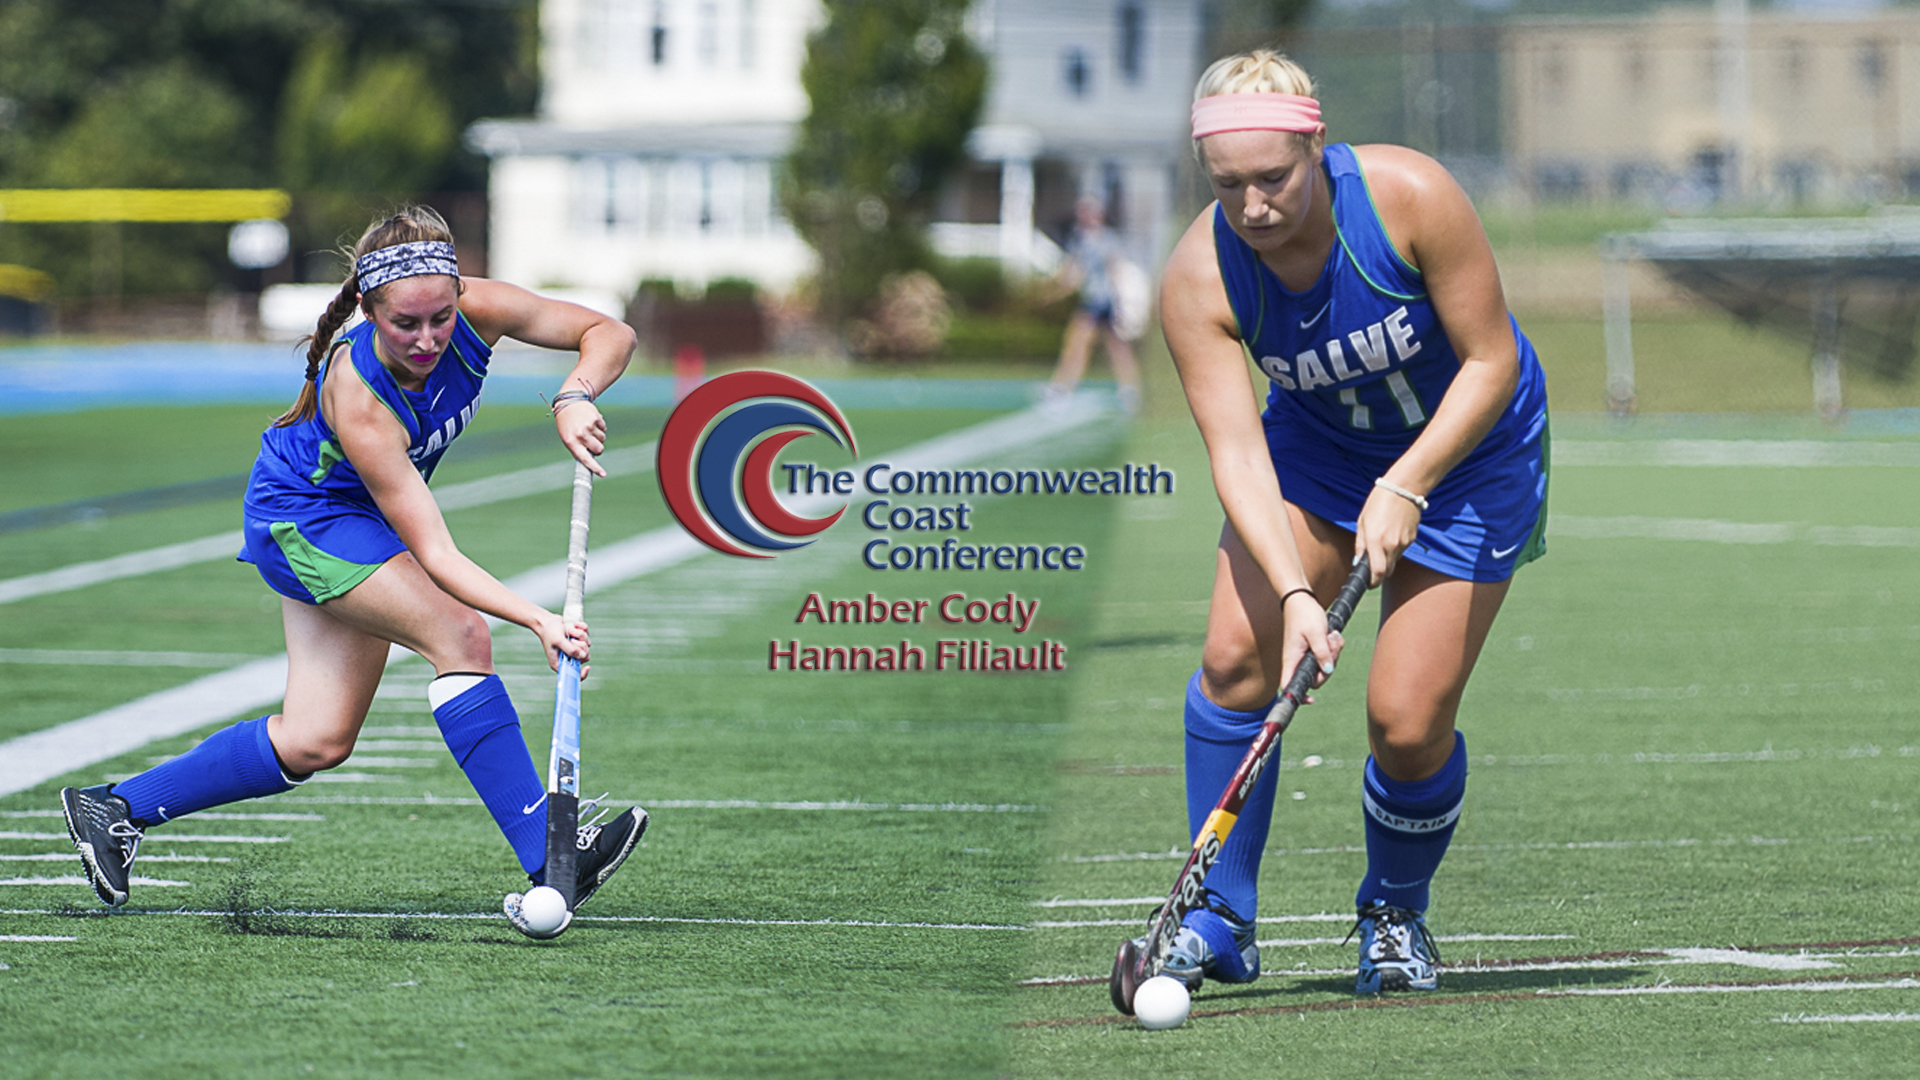 Amber Cody (right in image) earned the Commonwealth Coast Conference (CCC) Offensive Player of the Year award for field hockey; Hannah Filiault joins the senior on the all-conference team.